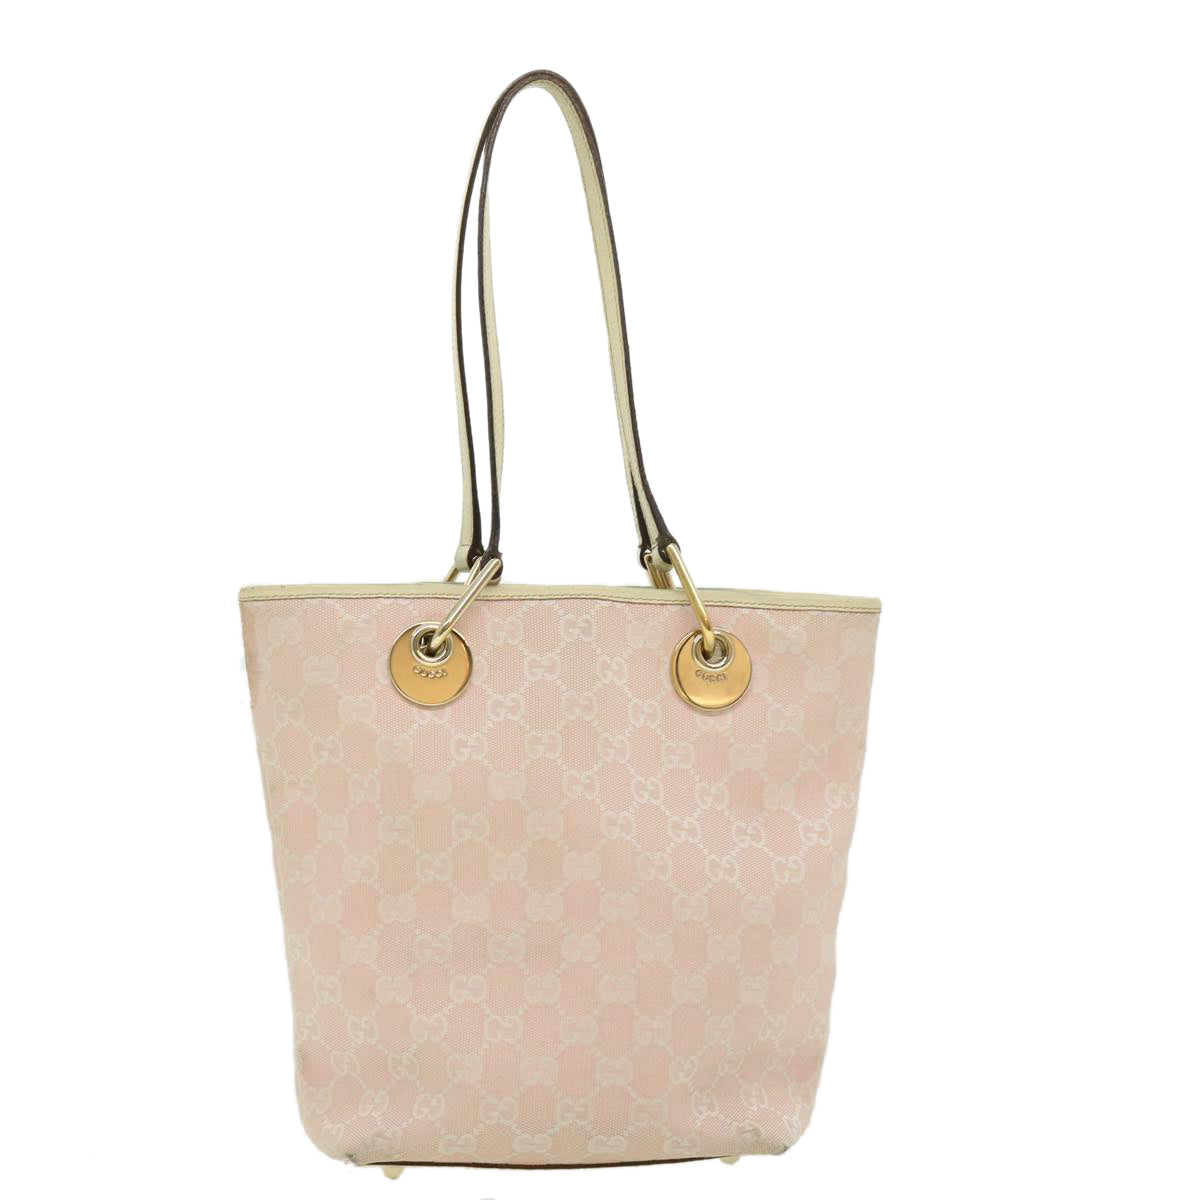 GUCCI GG Canvas Tote Bag Pink Auth am2713g